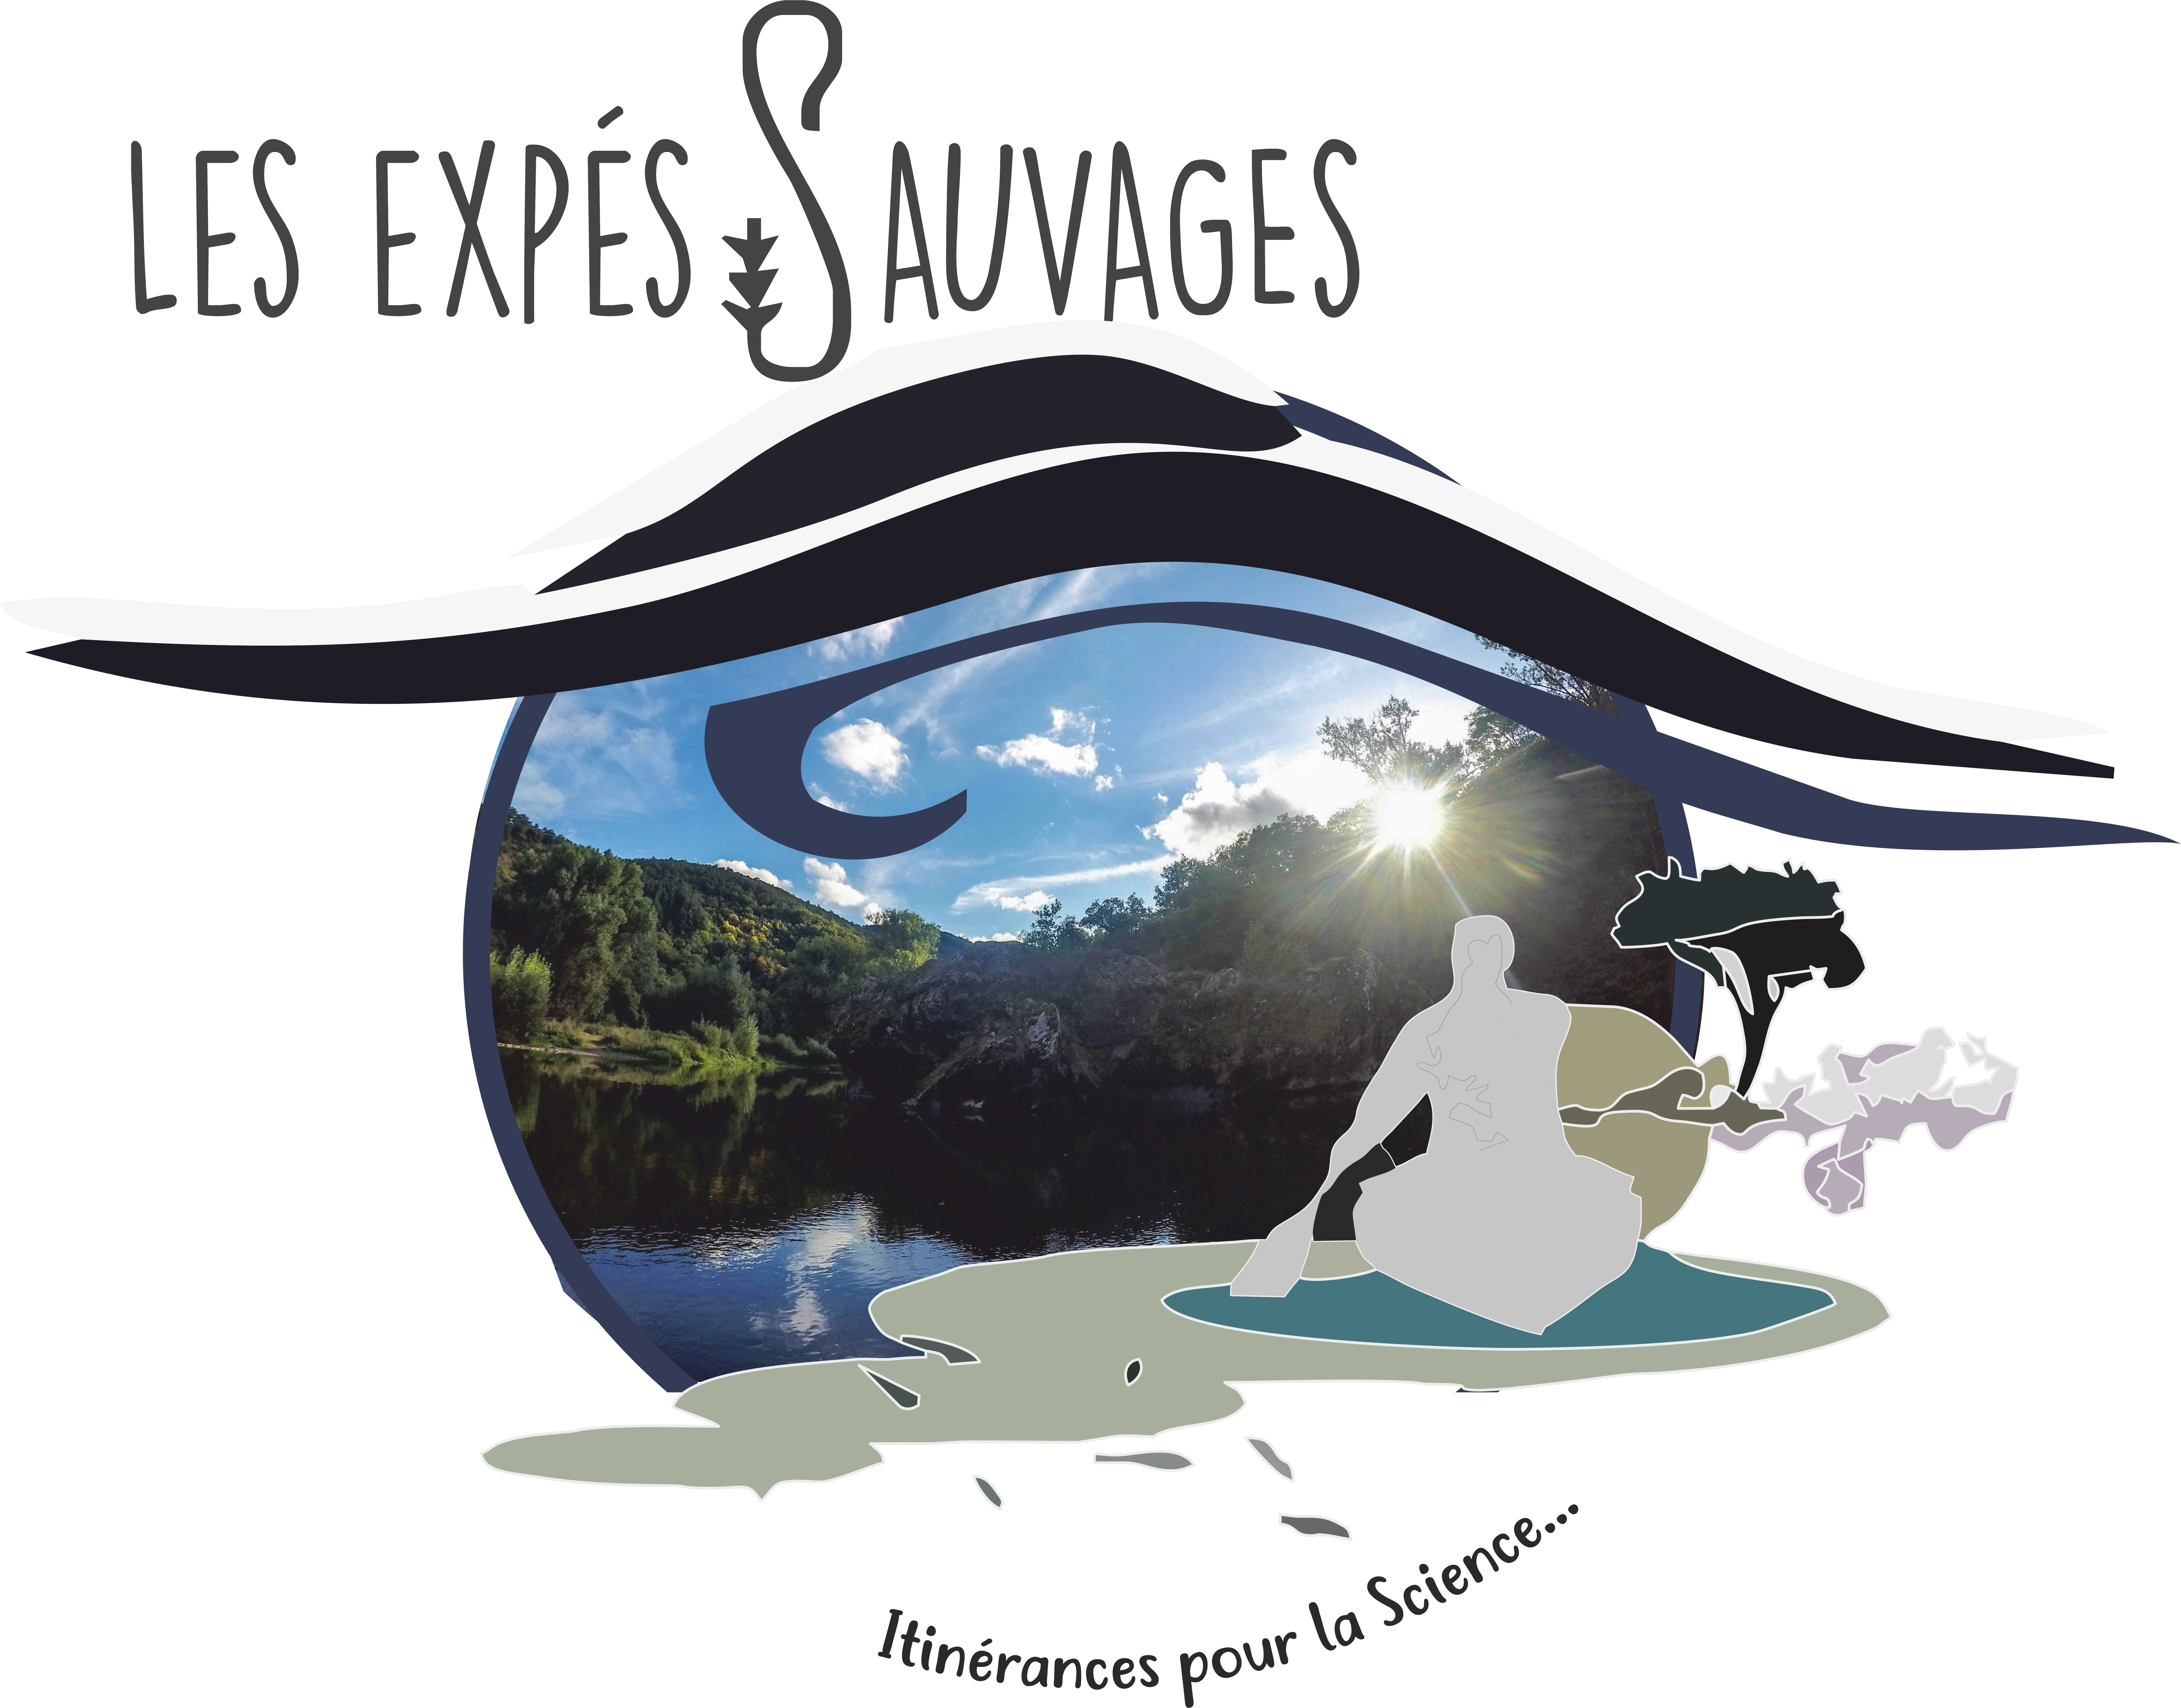 ExpeSauvages